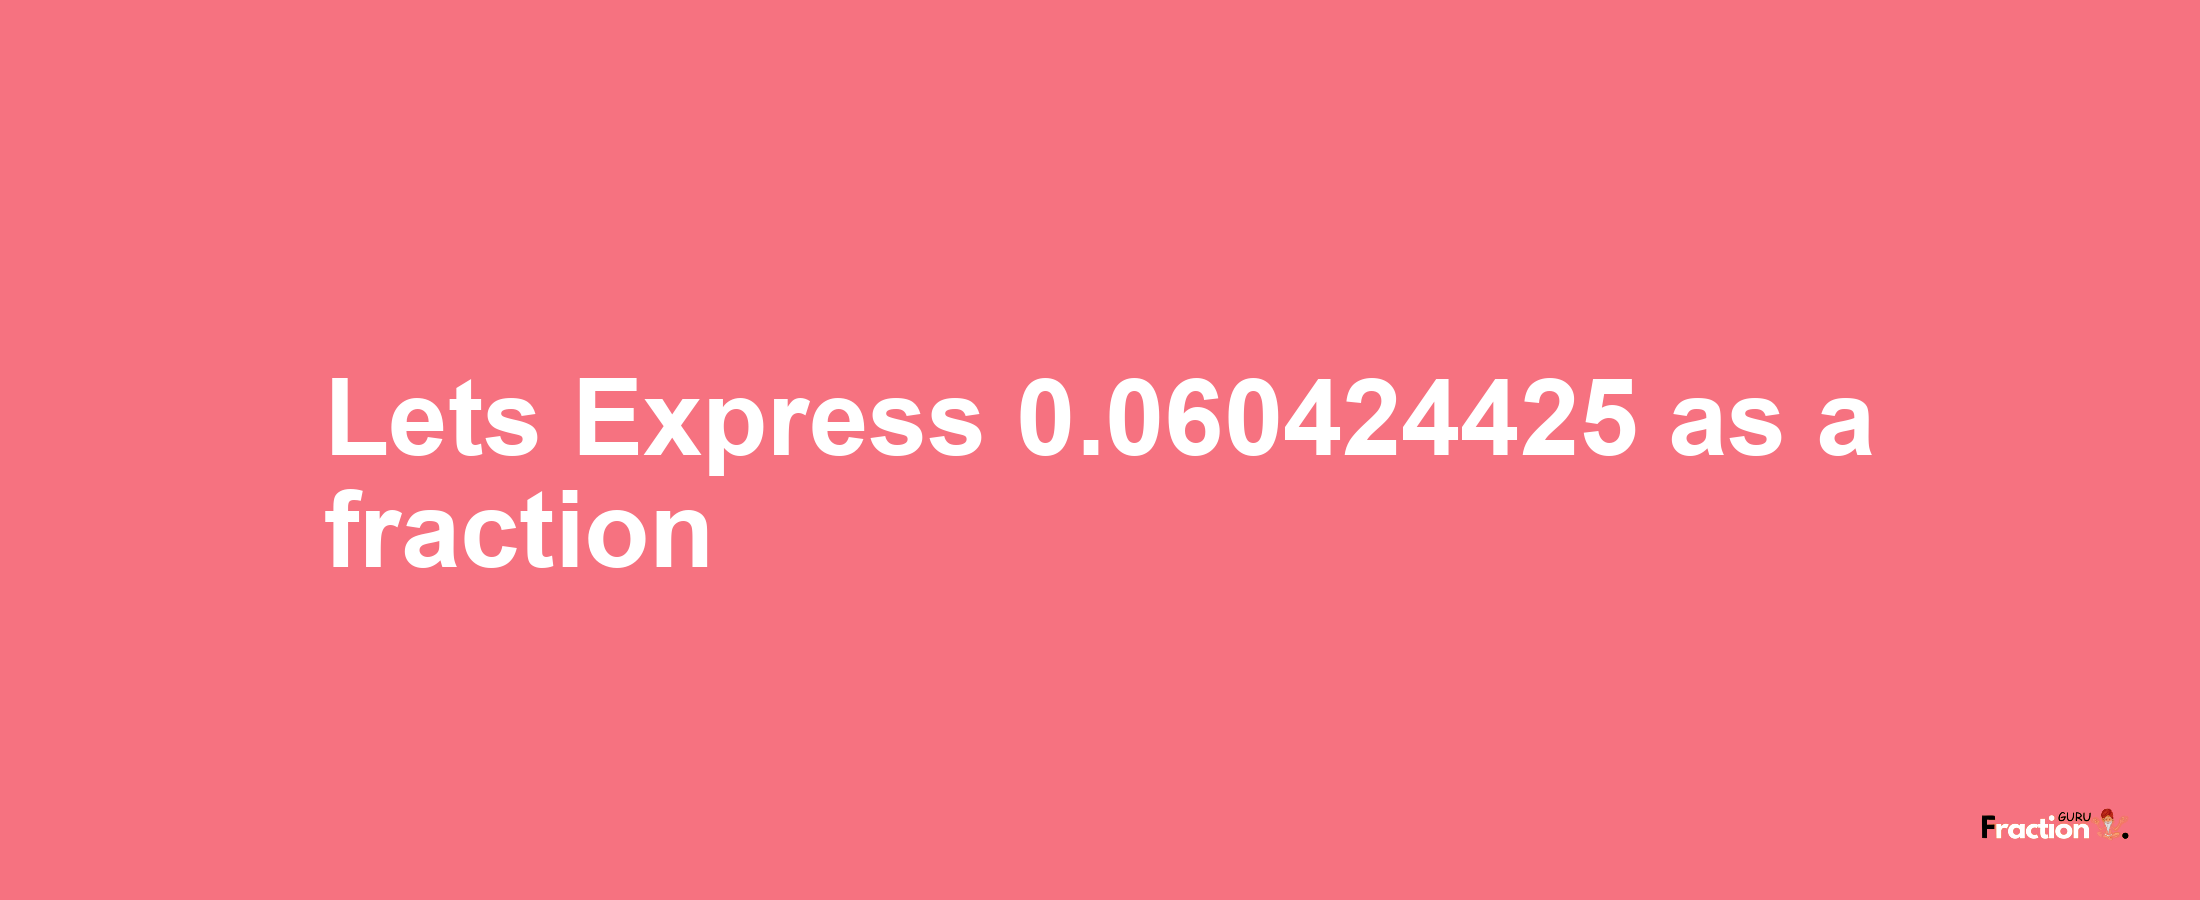 Lets Express 0.060424425 as afraction